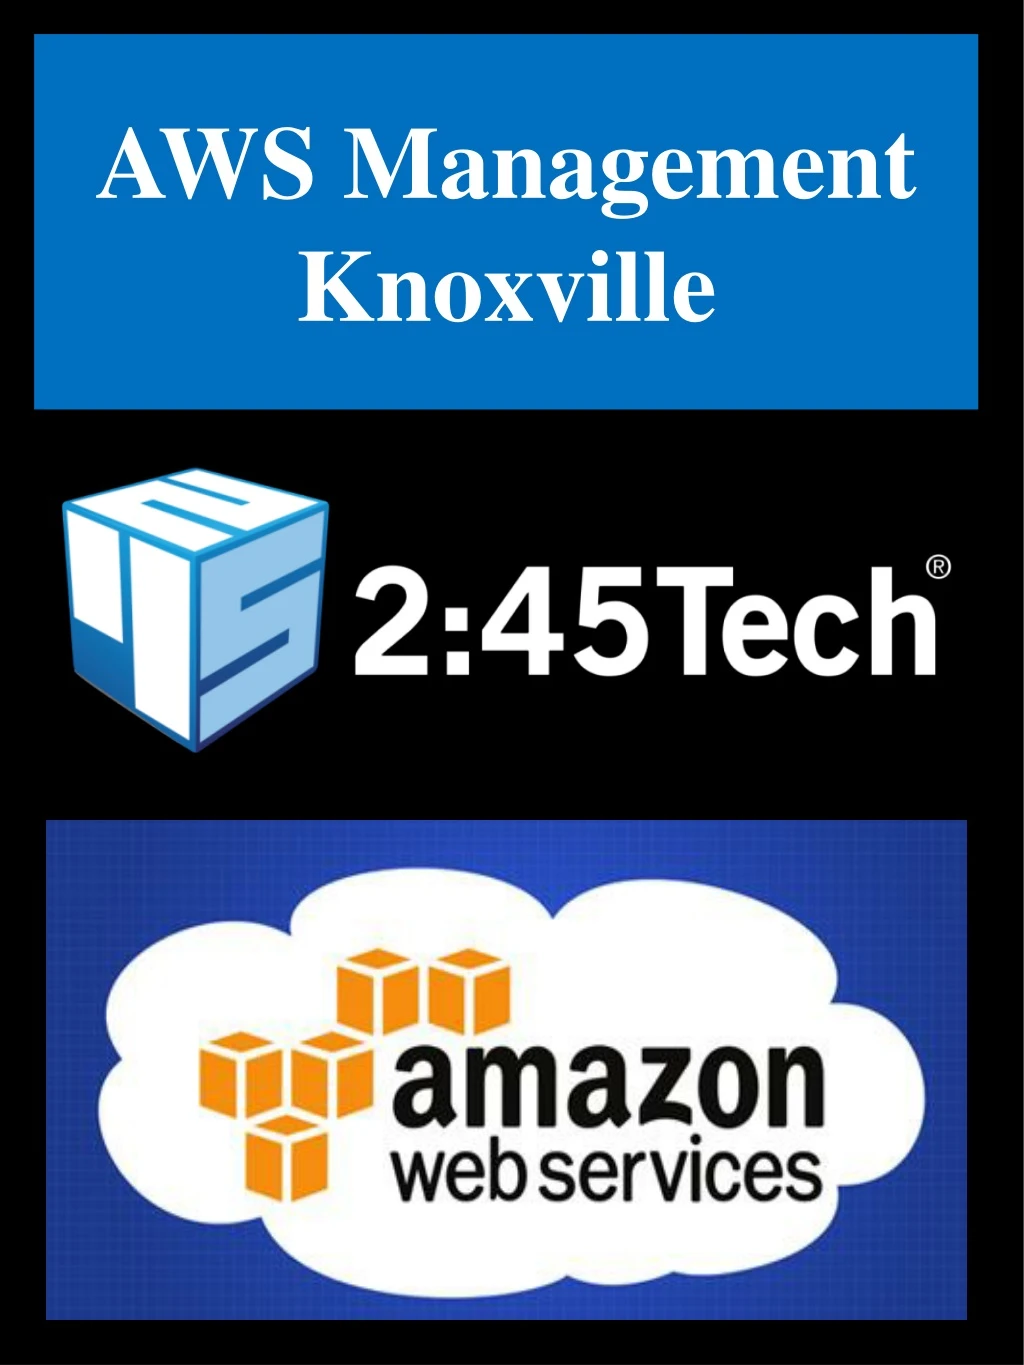 aws management knoxville